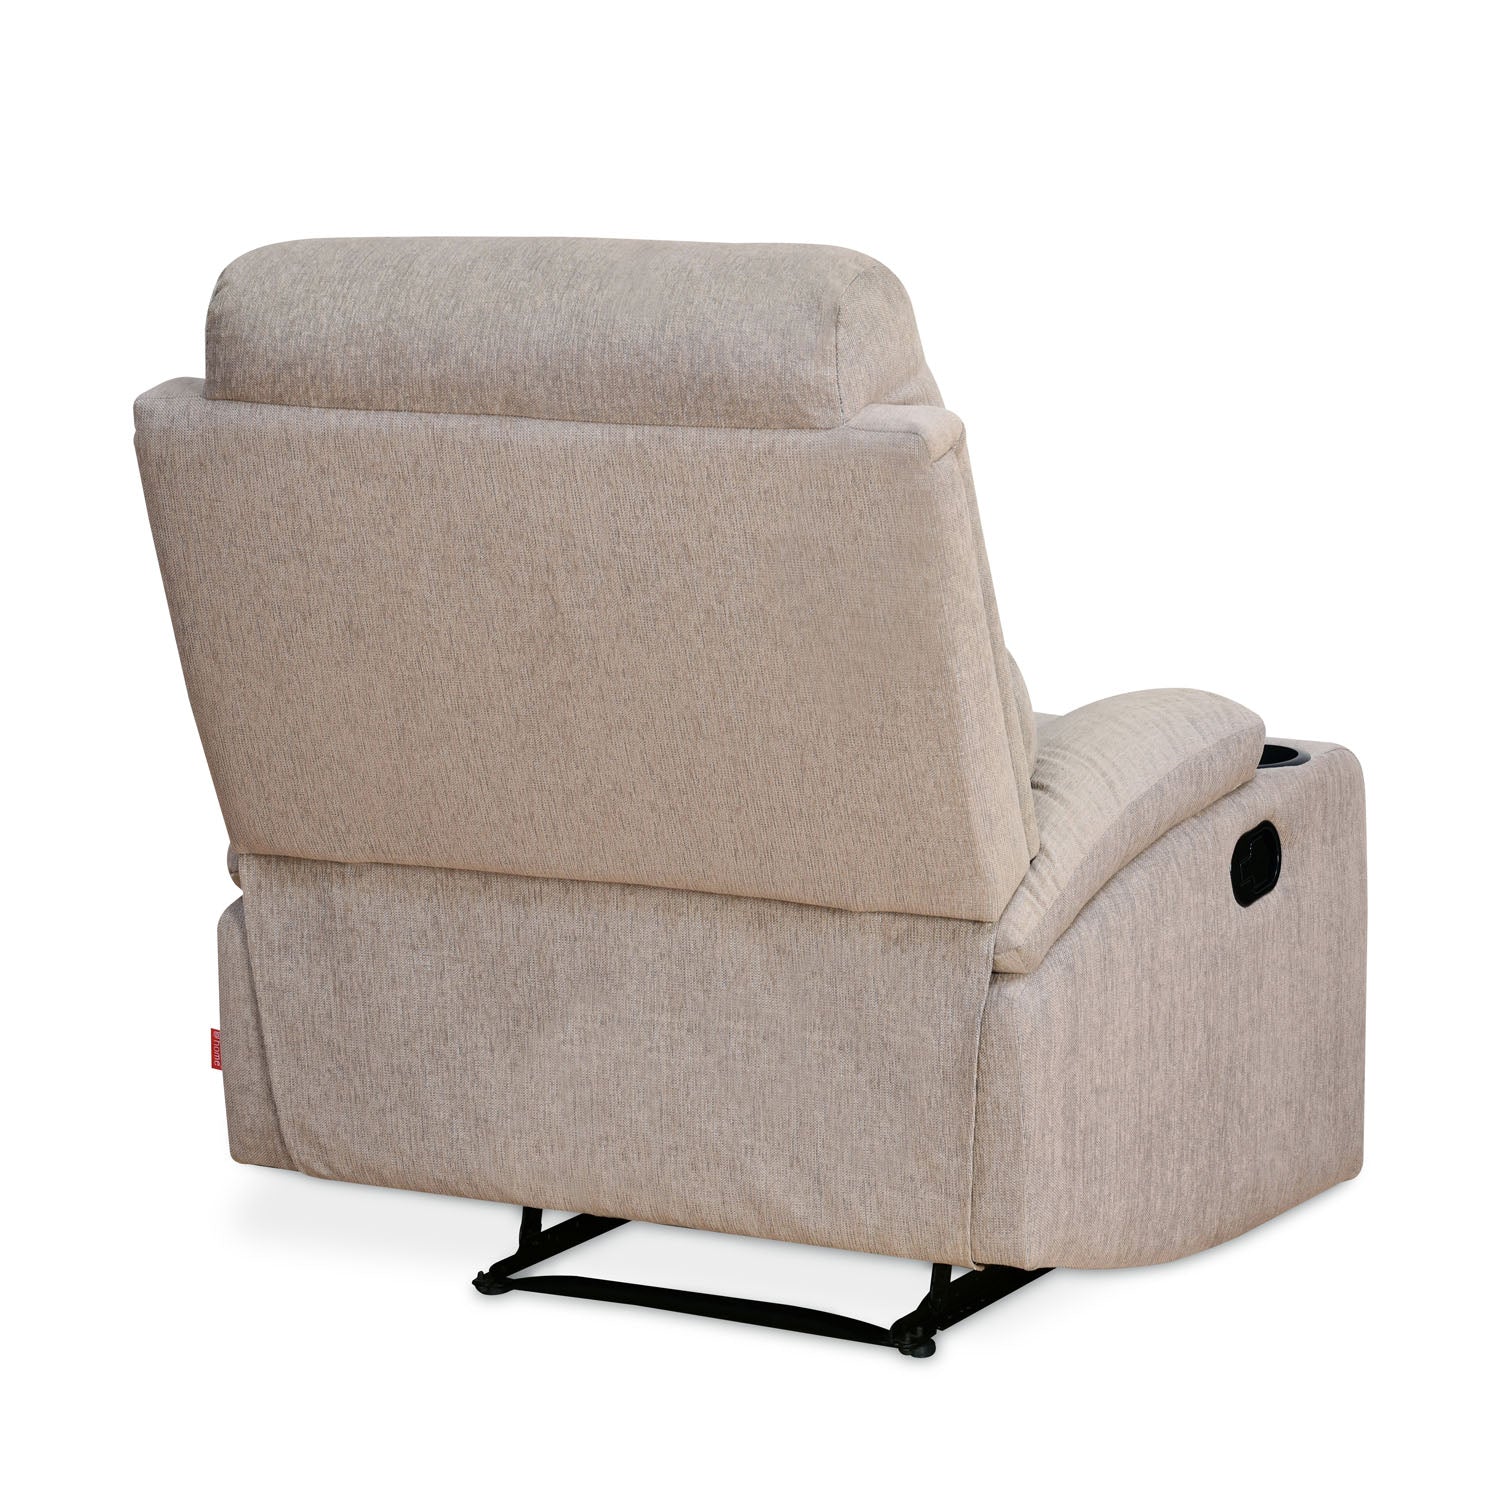 Comfy 1 Seater Fabric Manual Recliner with Cup Holder (Beige)